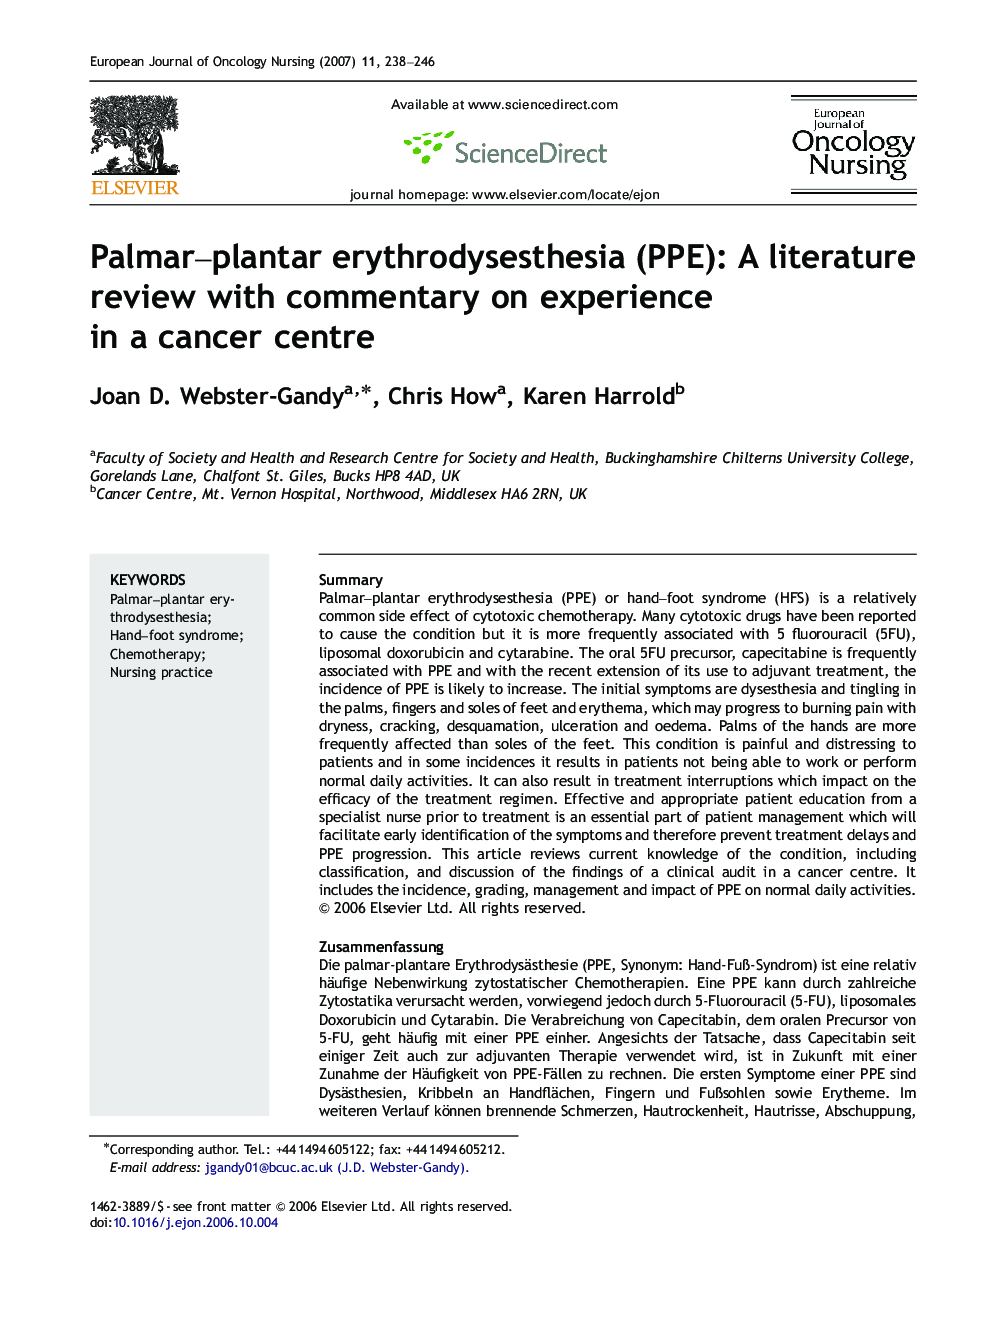 Palmar–plantar erythrodysesthesia (PPE): A literature review with commentary on experience in a cancer centre